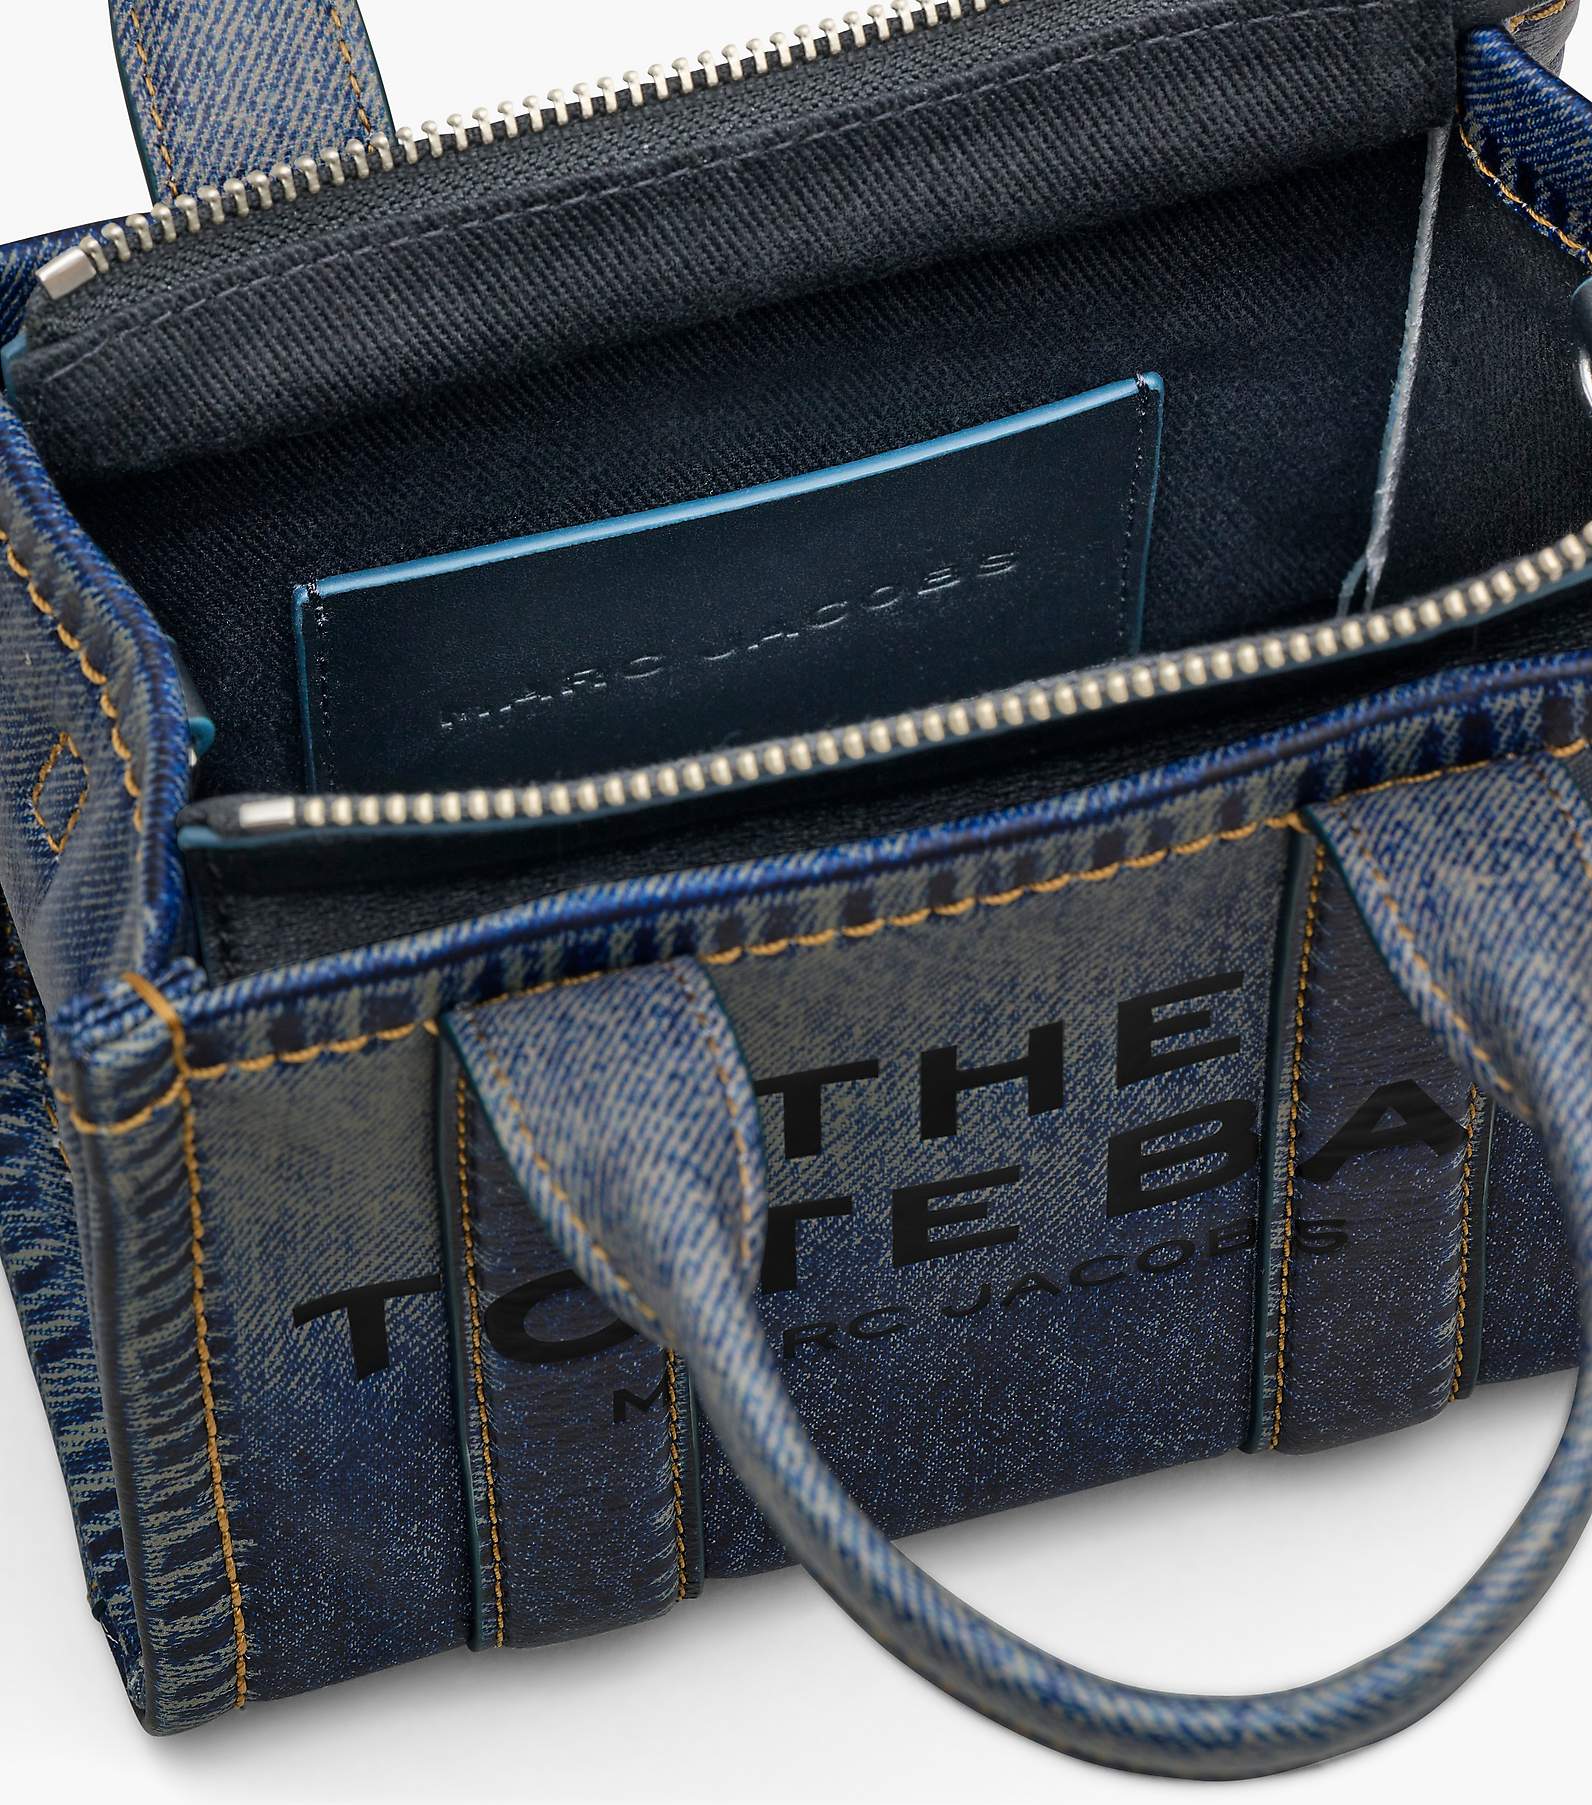 THE DENIM TOTE BAG for Marc Jacobs Japan (Marc Jacobs)